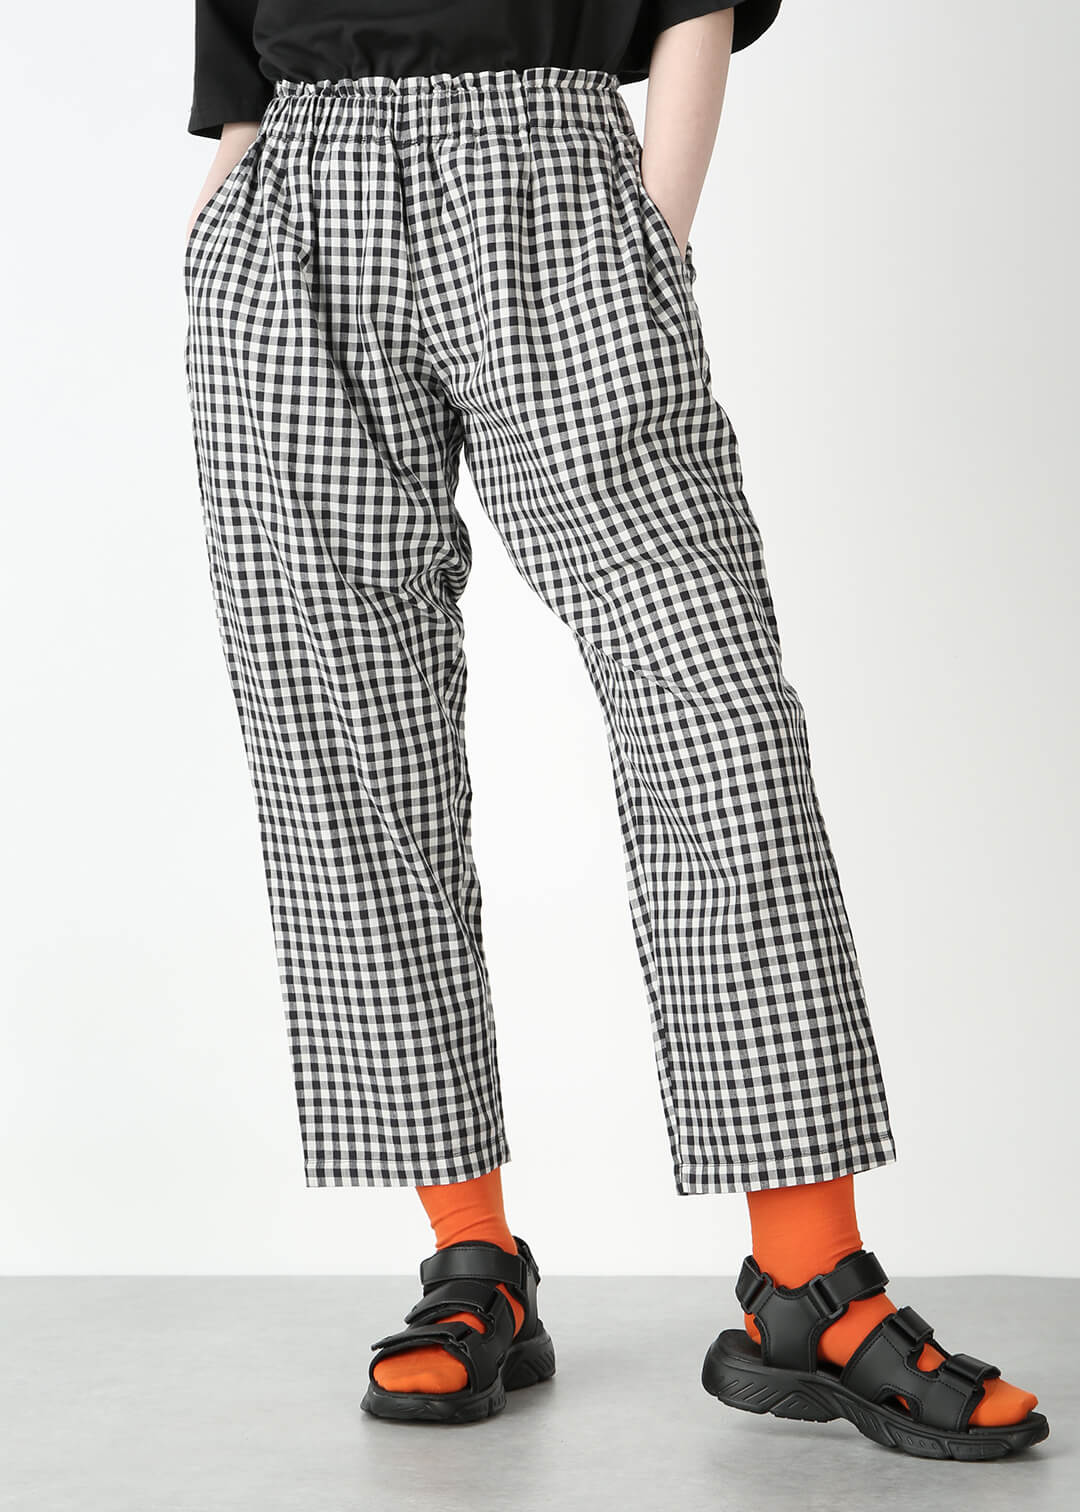 Kaname Relax Pants Gingham